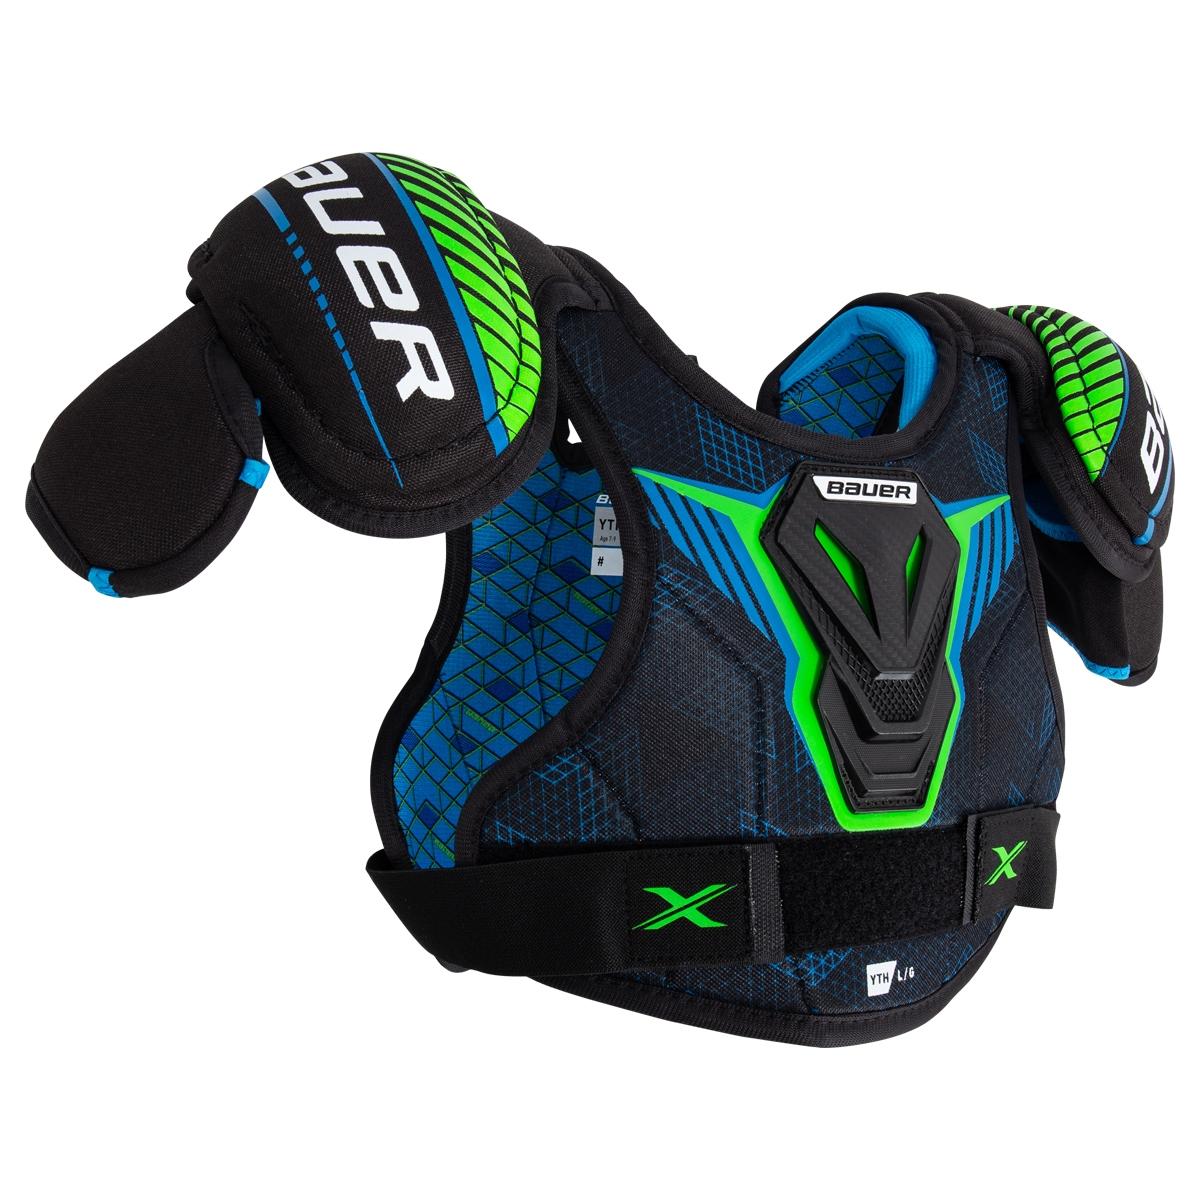 Bauer X Yth. Hockey Shoulder Padsproduct zoom image #2